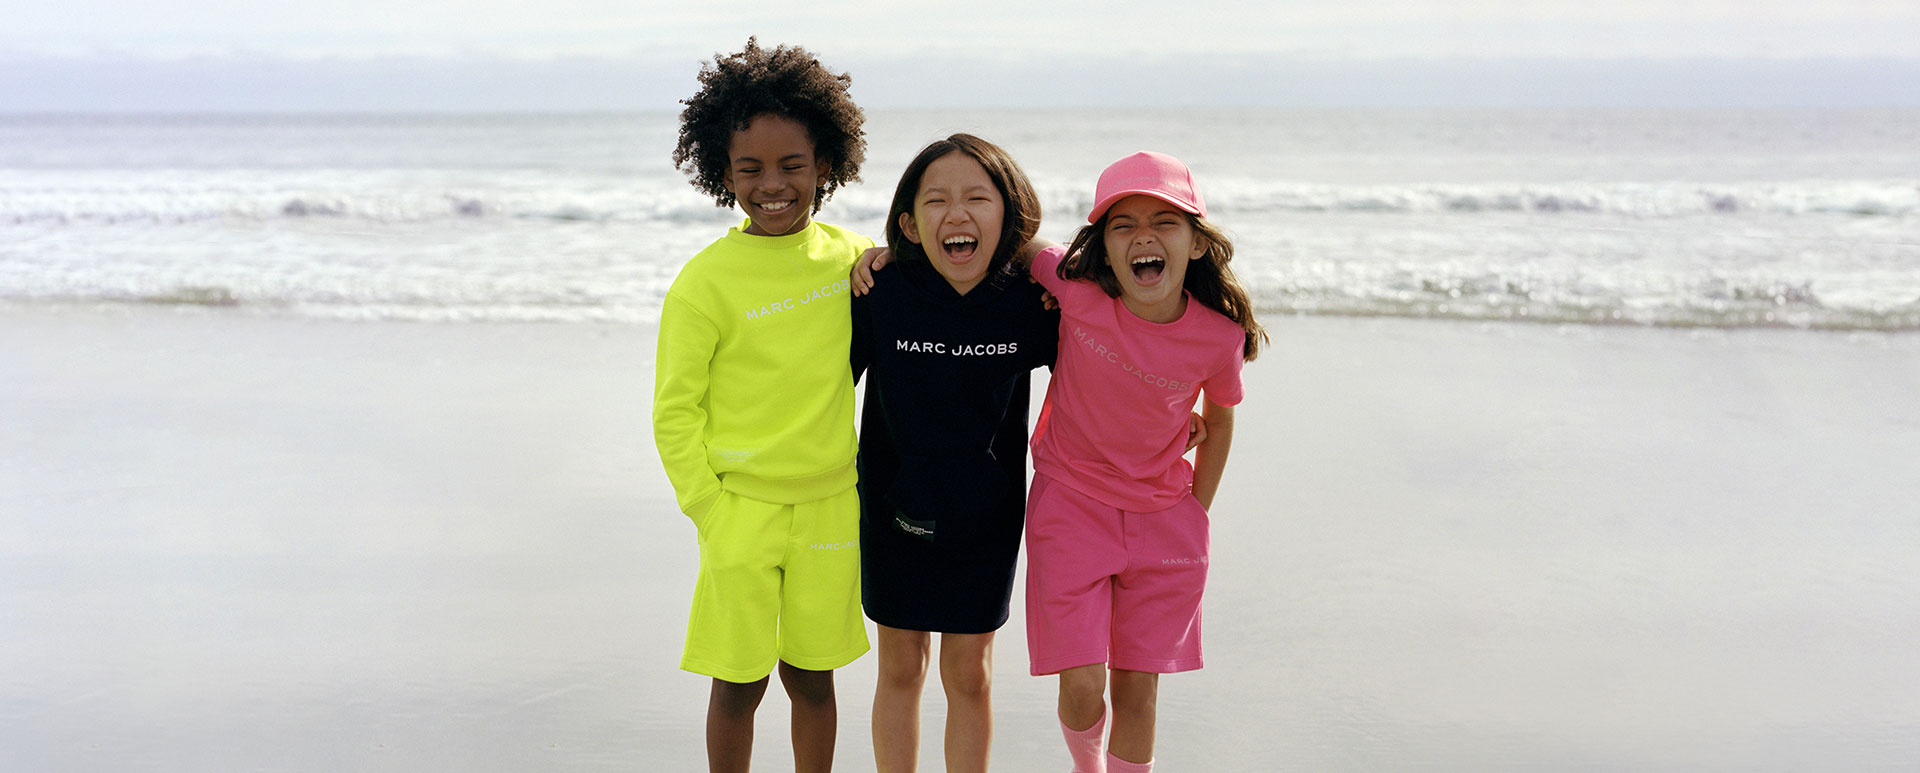 luxury children's clothing for girls and boys from The Marc Jacobs brand